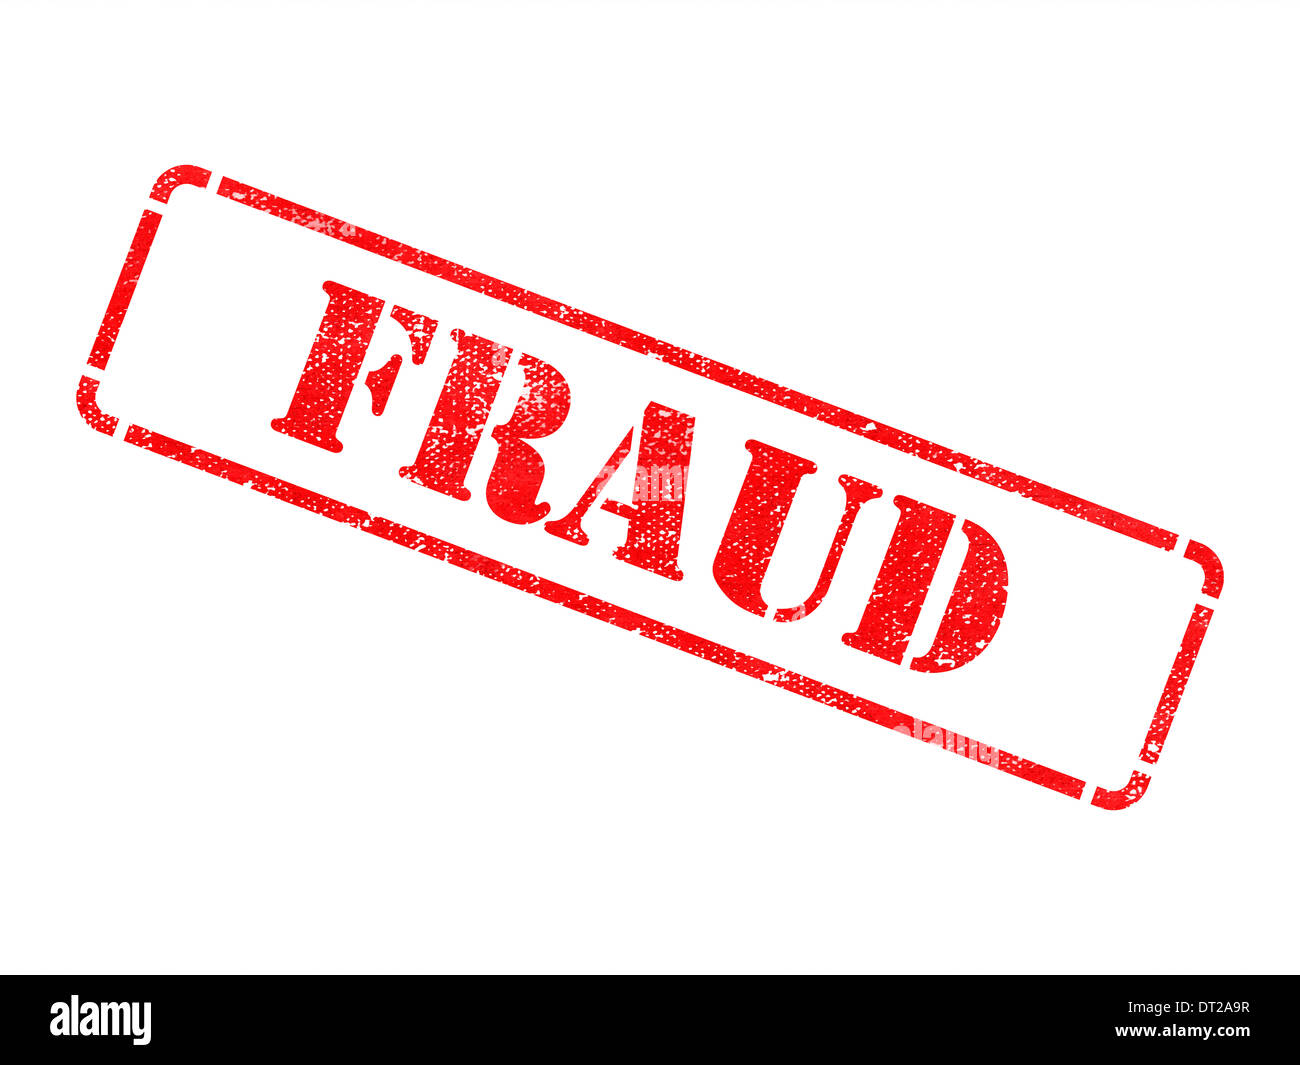 Fraud - Inscription on Red Rubber Stamp. Stock Photo